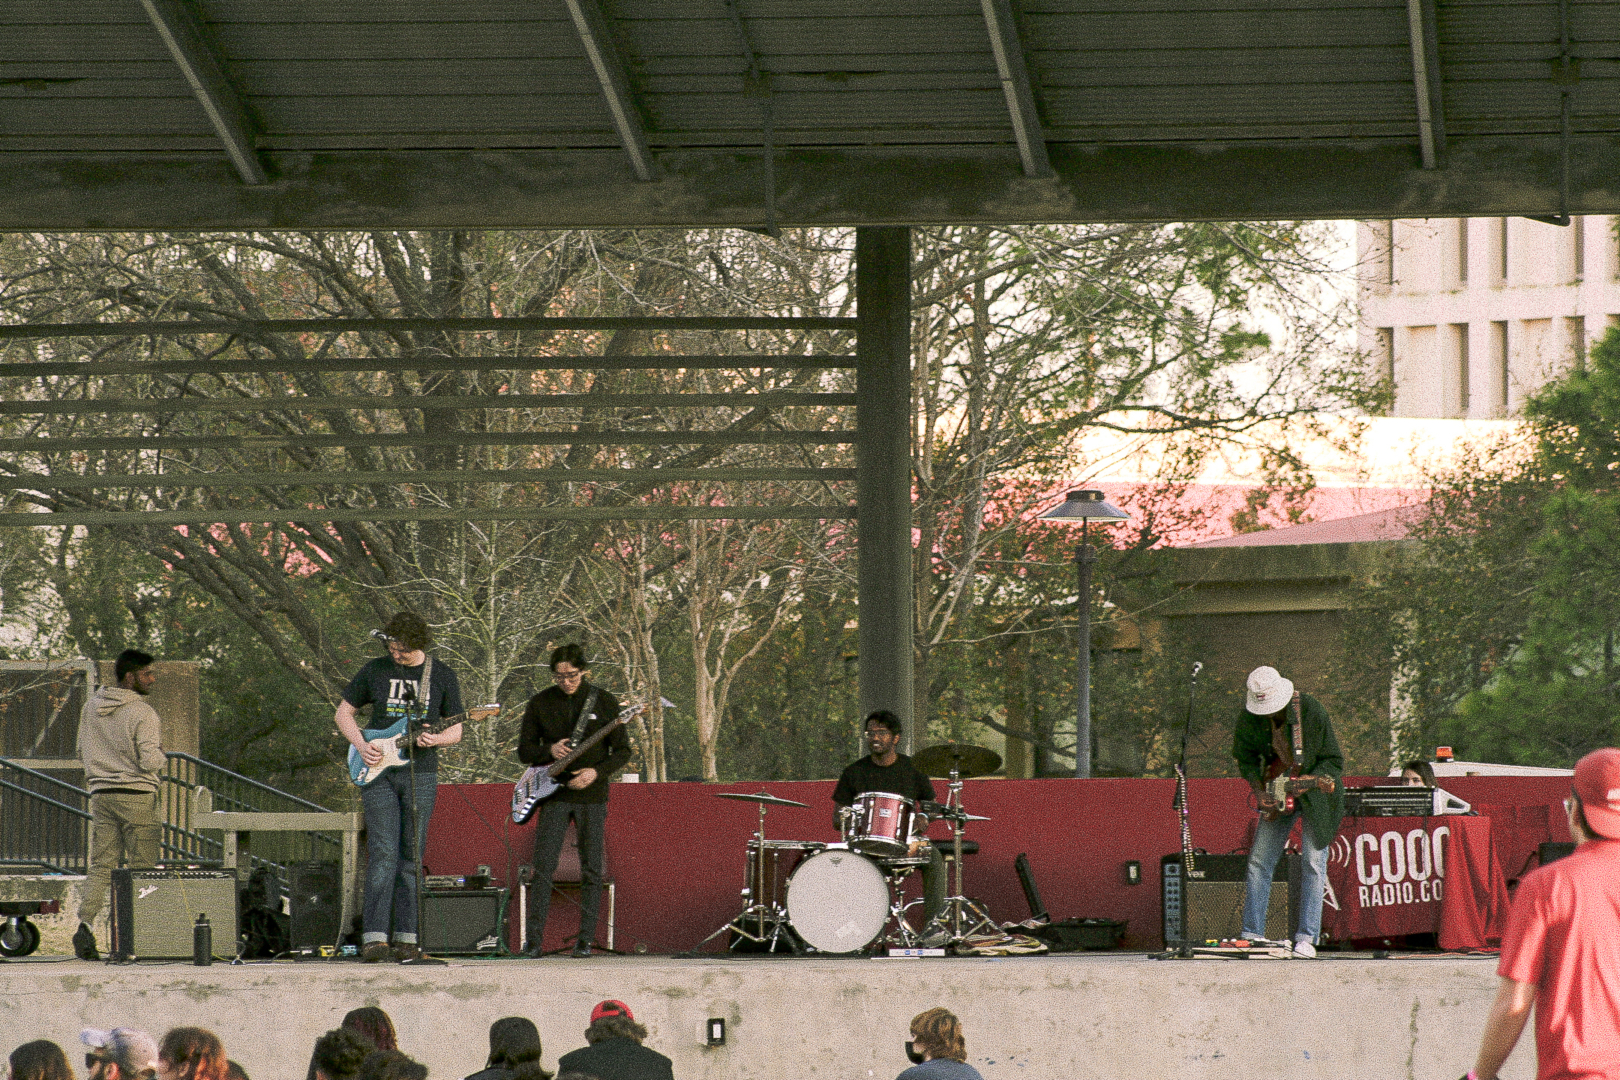 Local Houston bands performed at the Coogchella this Tuesday. | Courtesy of Coog Radio